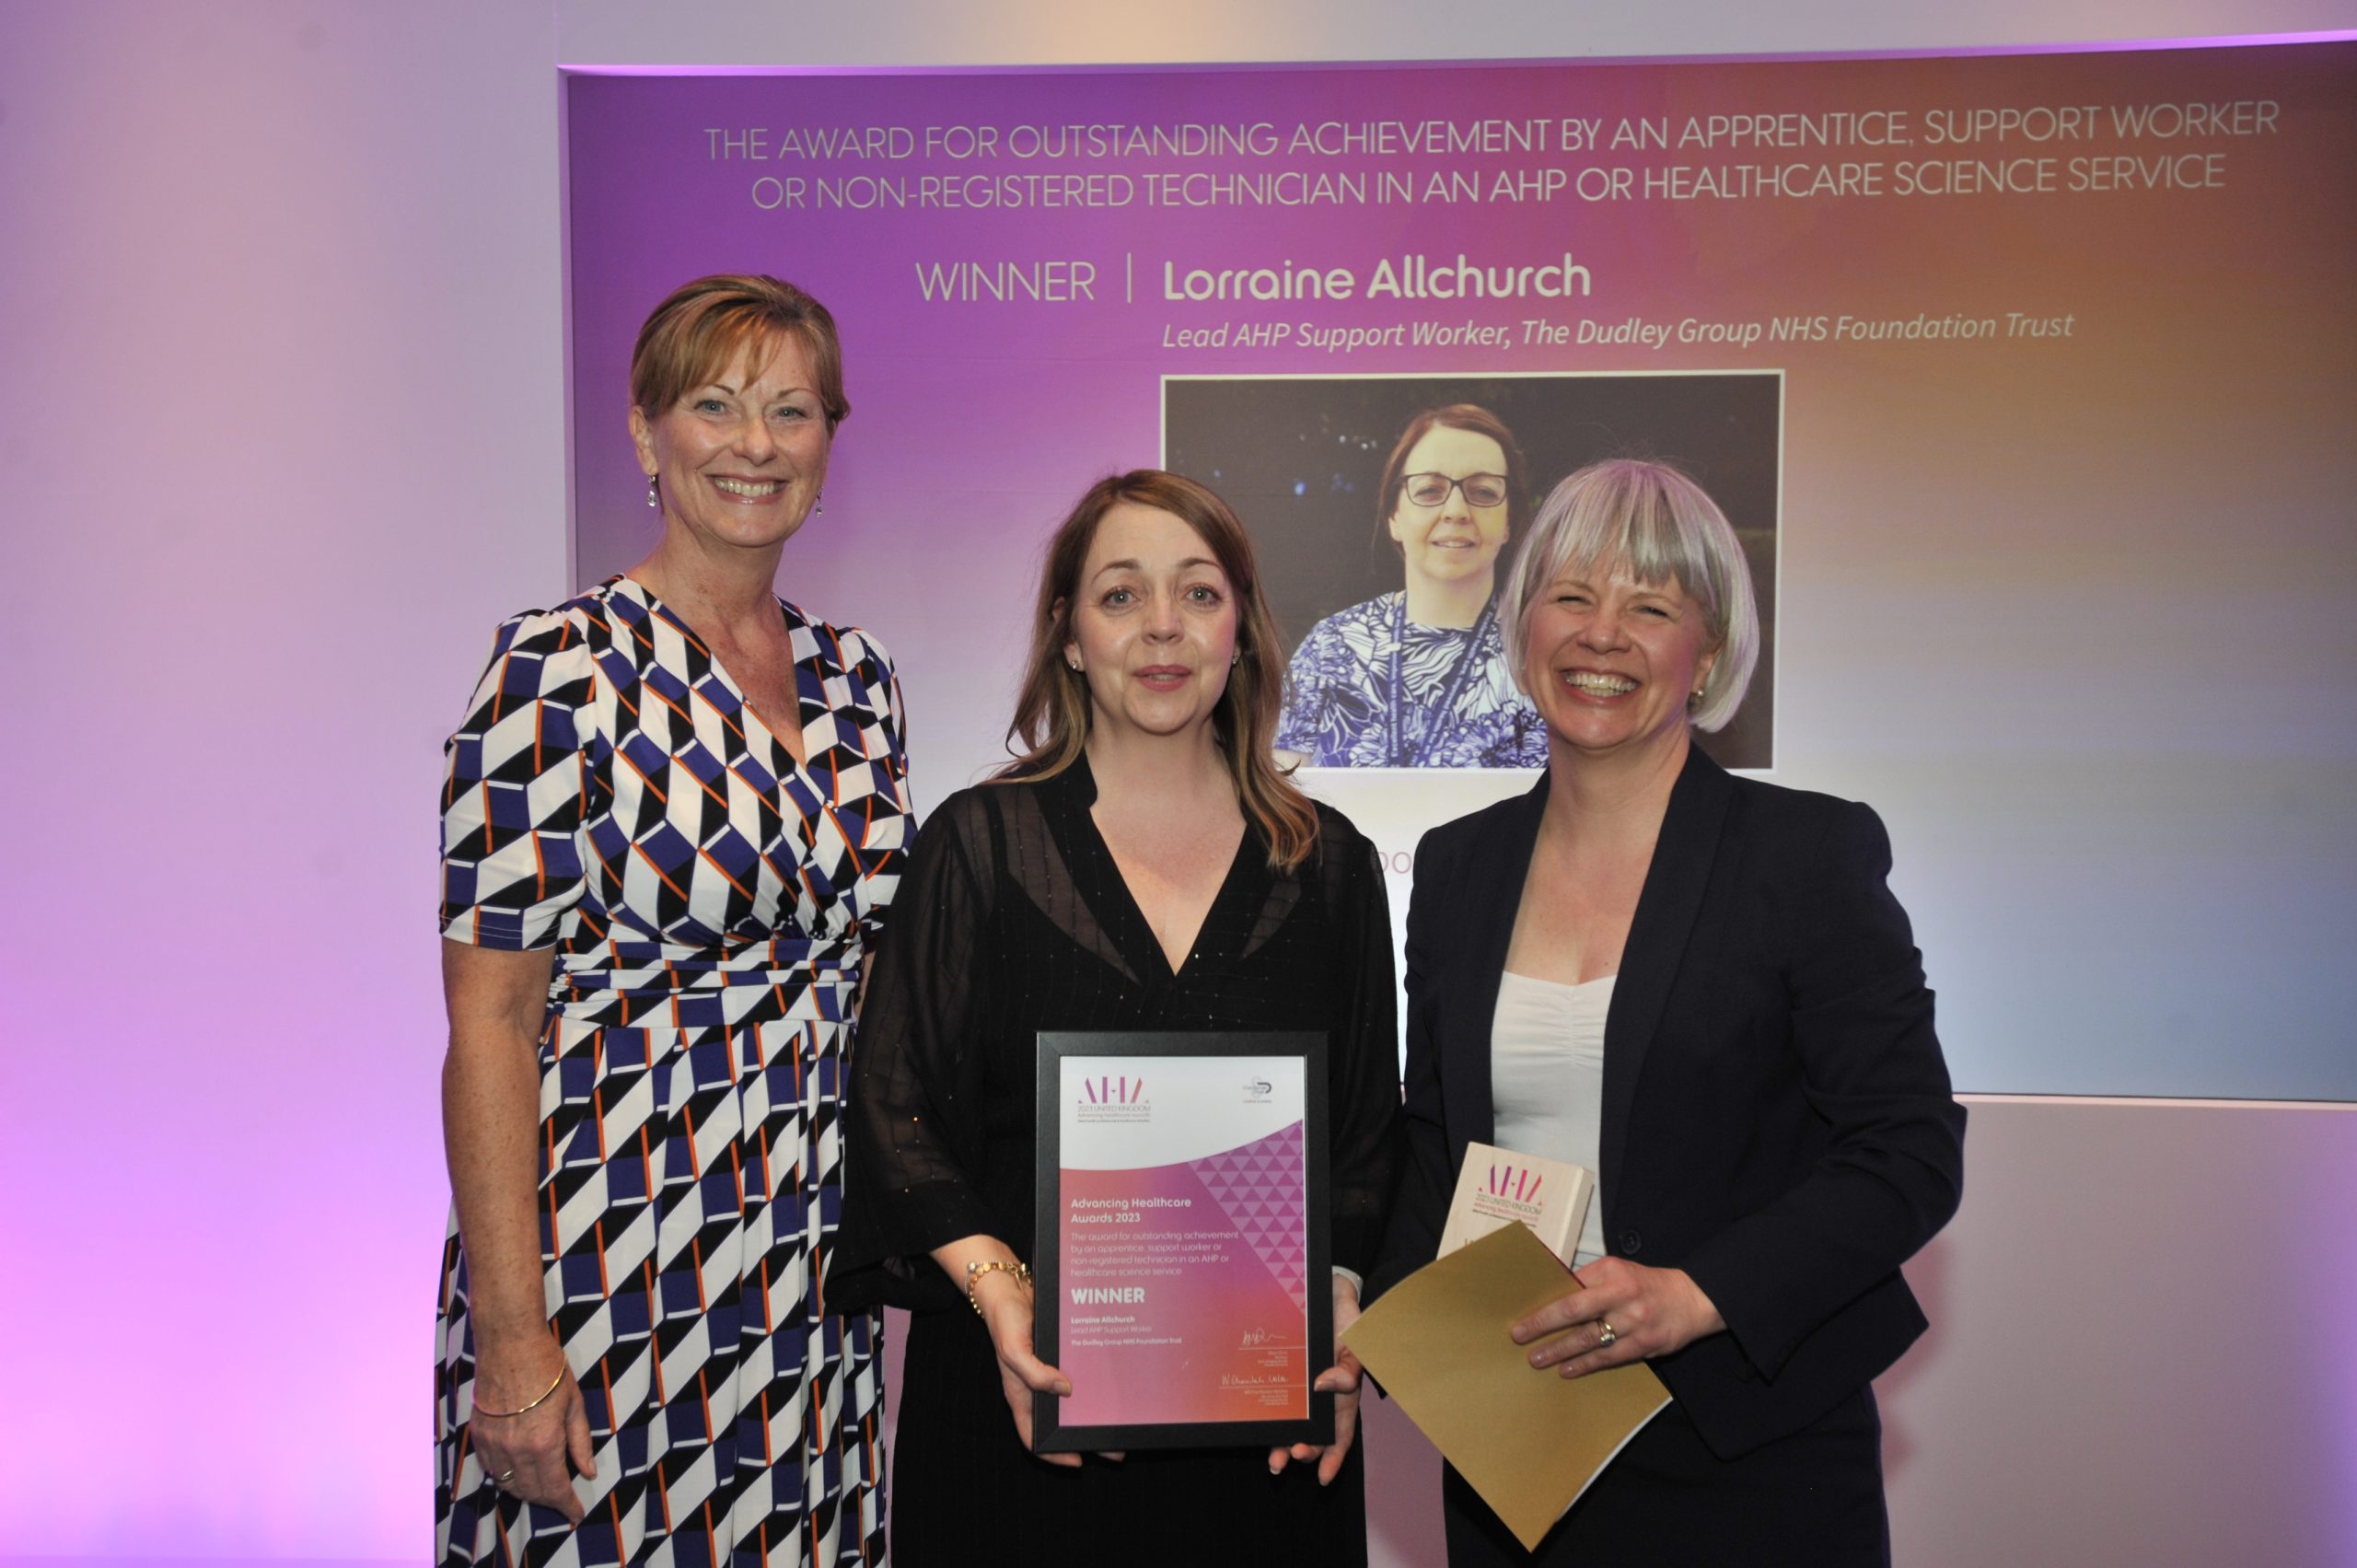 Outstanding achievement by a support worker